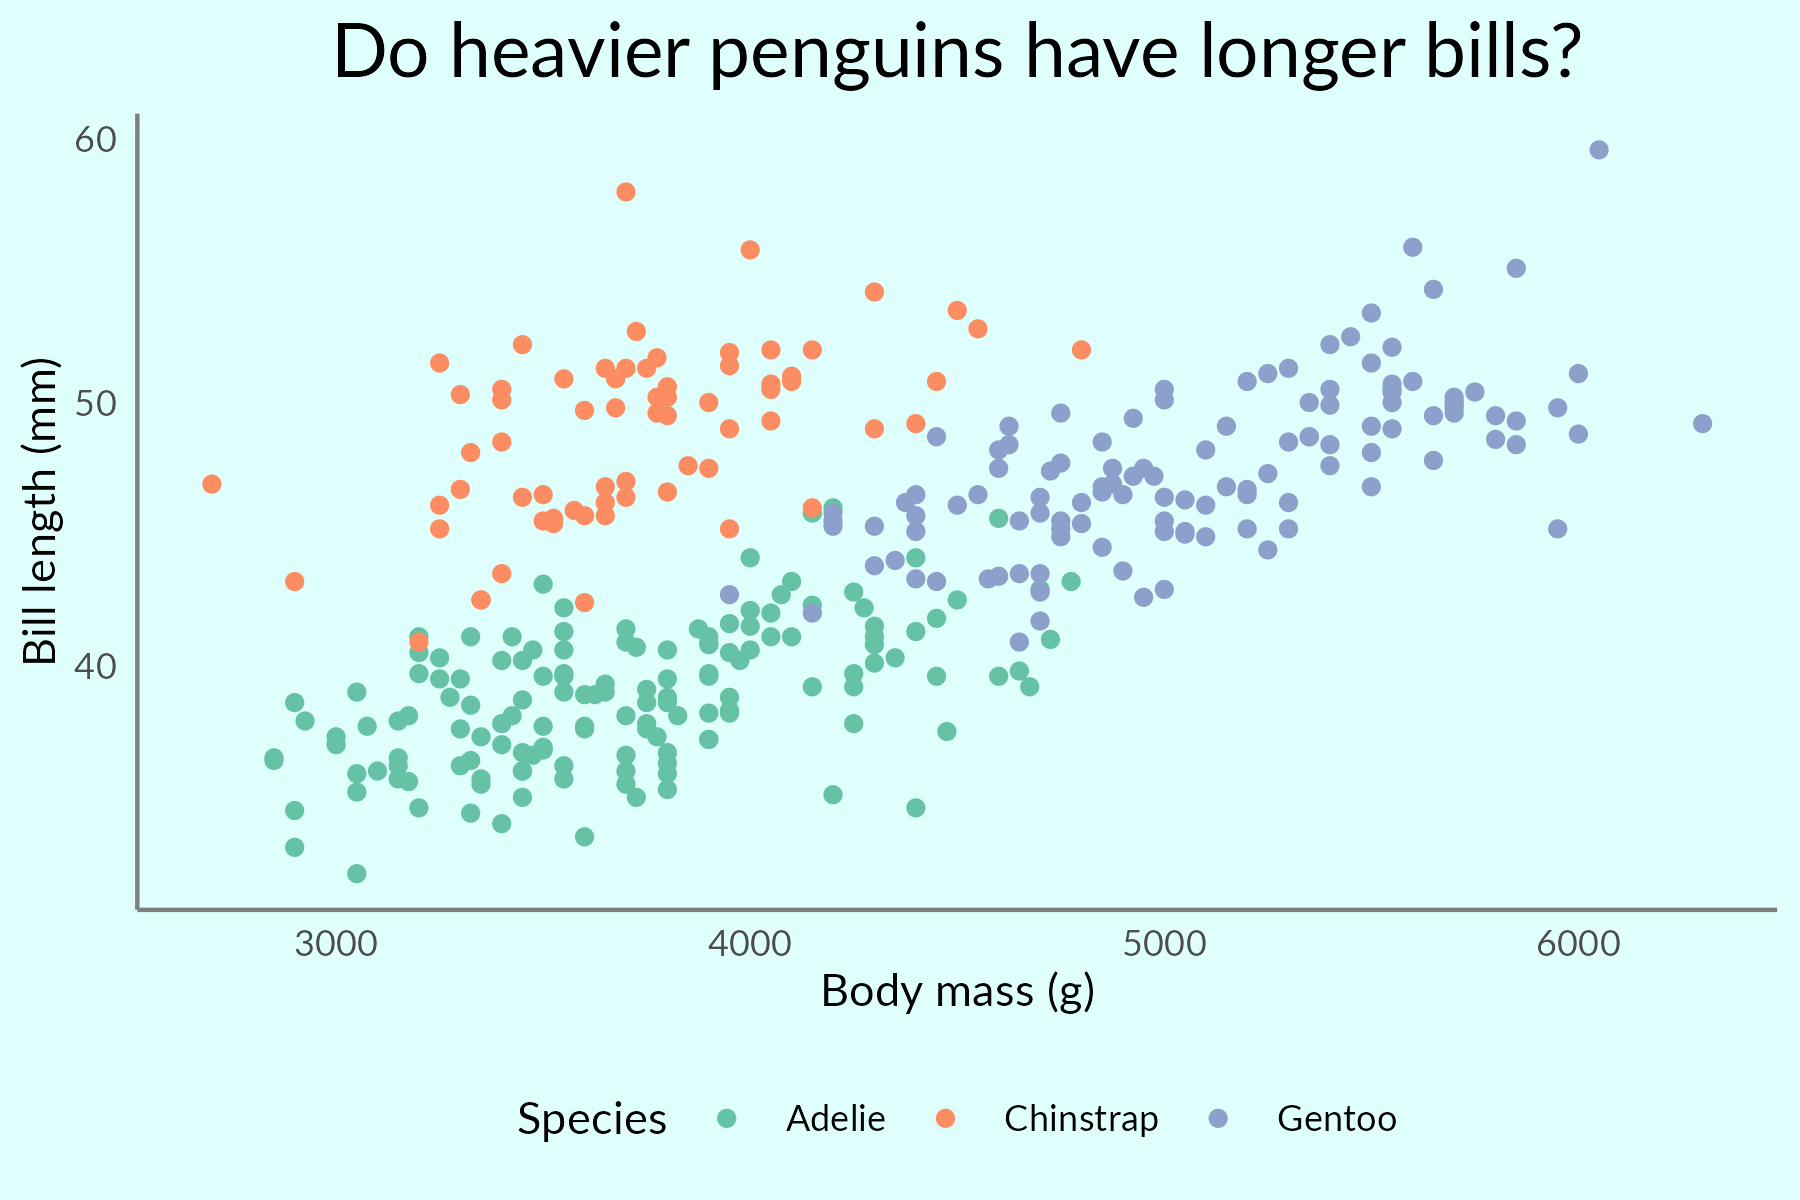 The same scatter plot as above (theme minimal, legend at bottom, grey axes, no grid lines, modified text) but entire plot background has been changed to a pale blue colour.